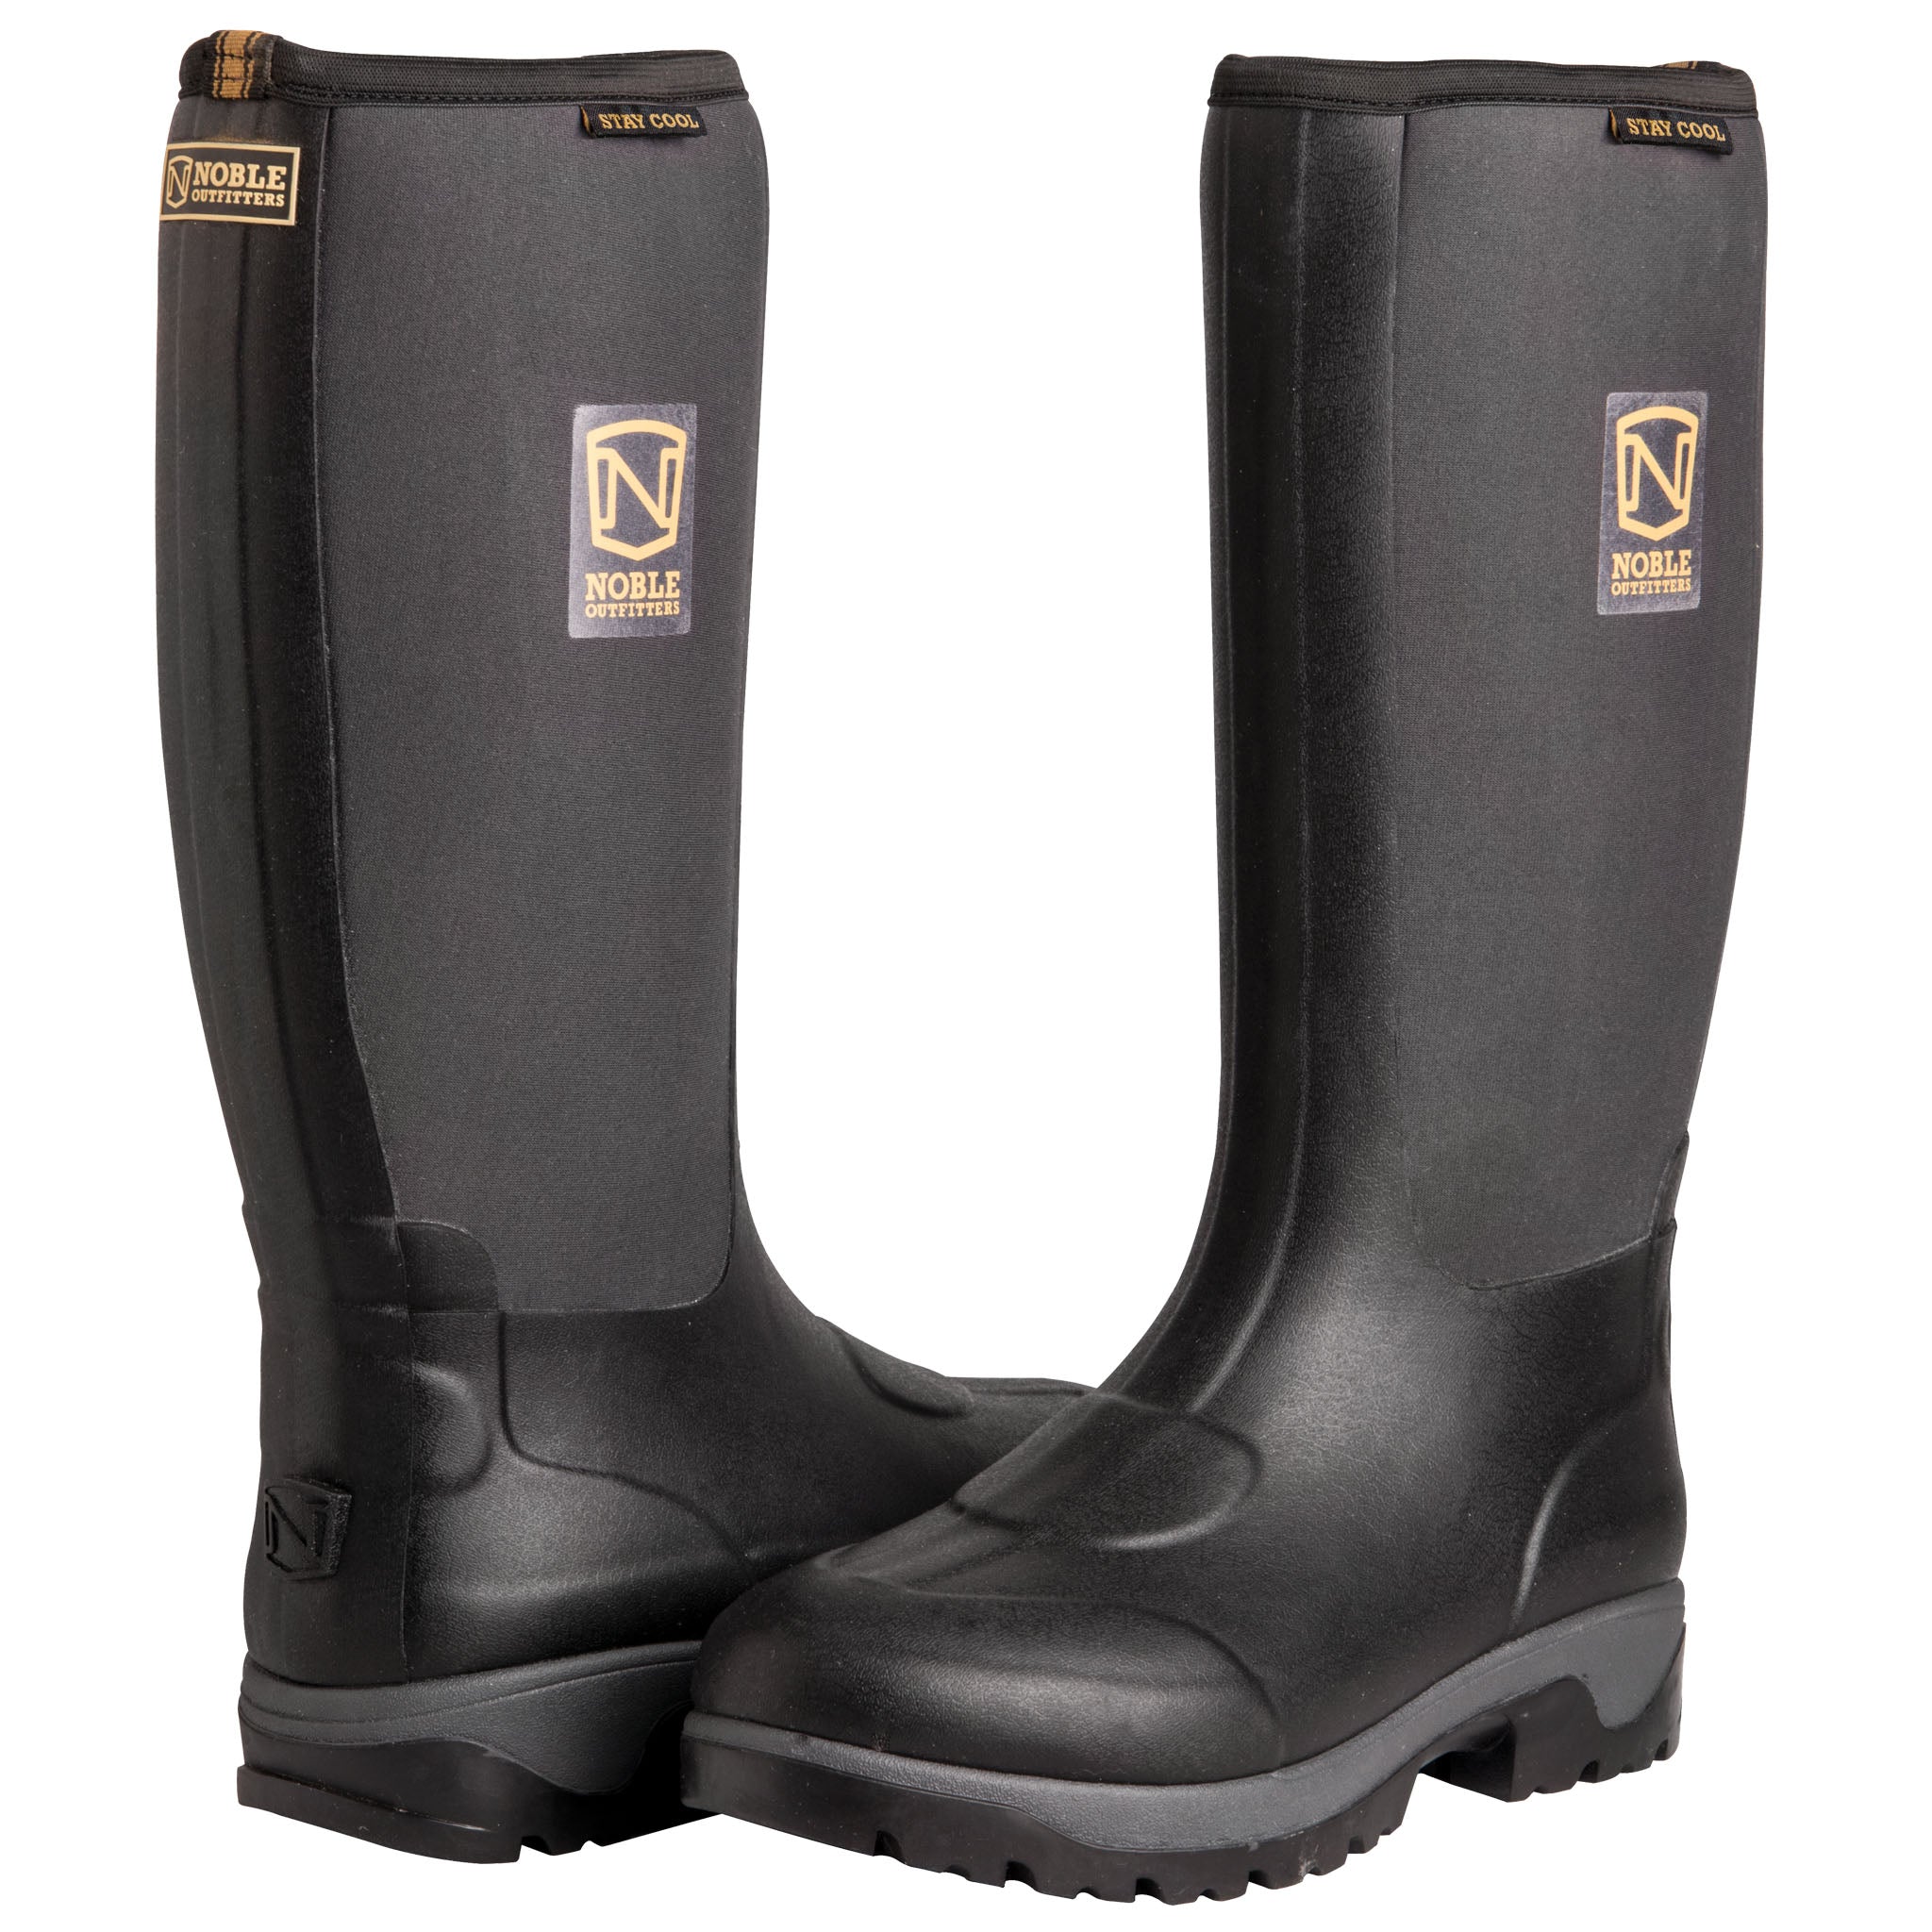 Noble Outfitters - Men's Mud's Stay Cool High Wellington - Male Equestrian